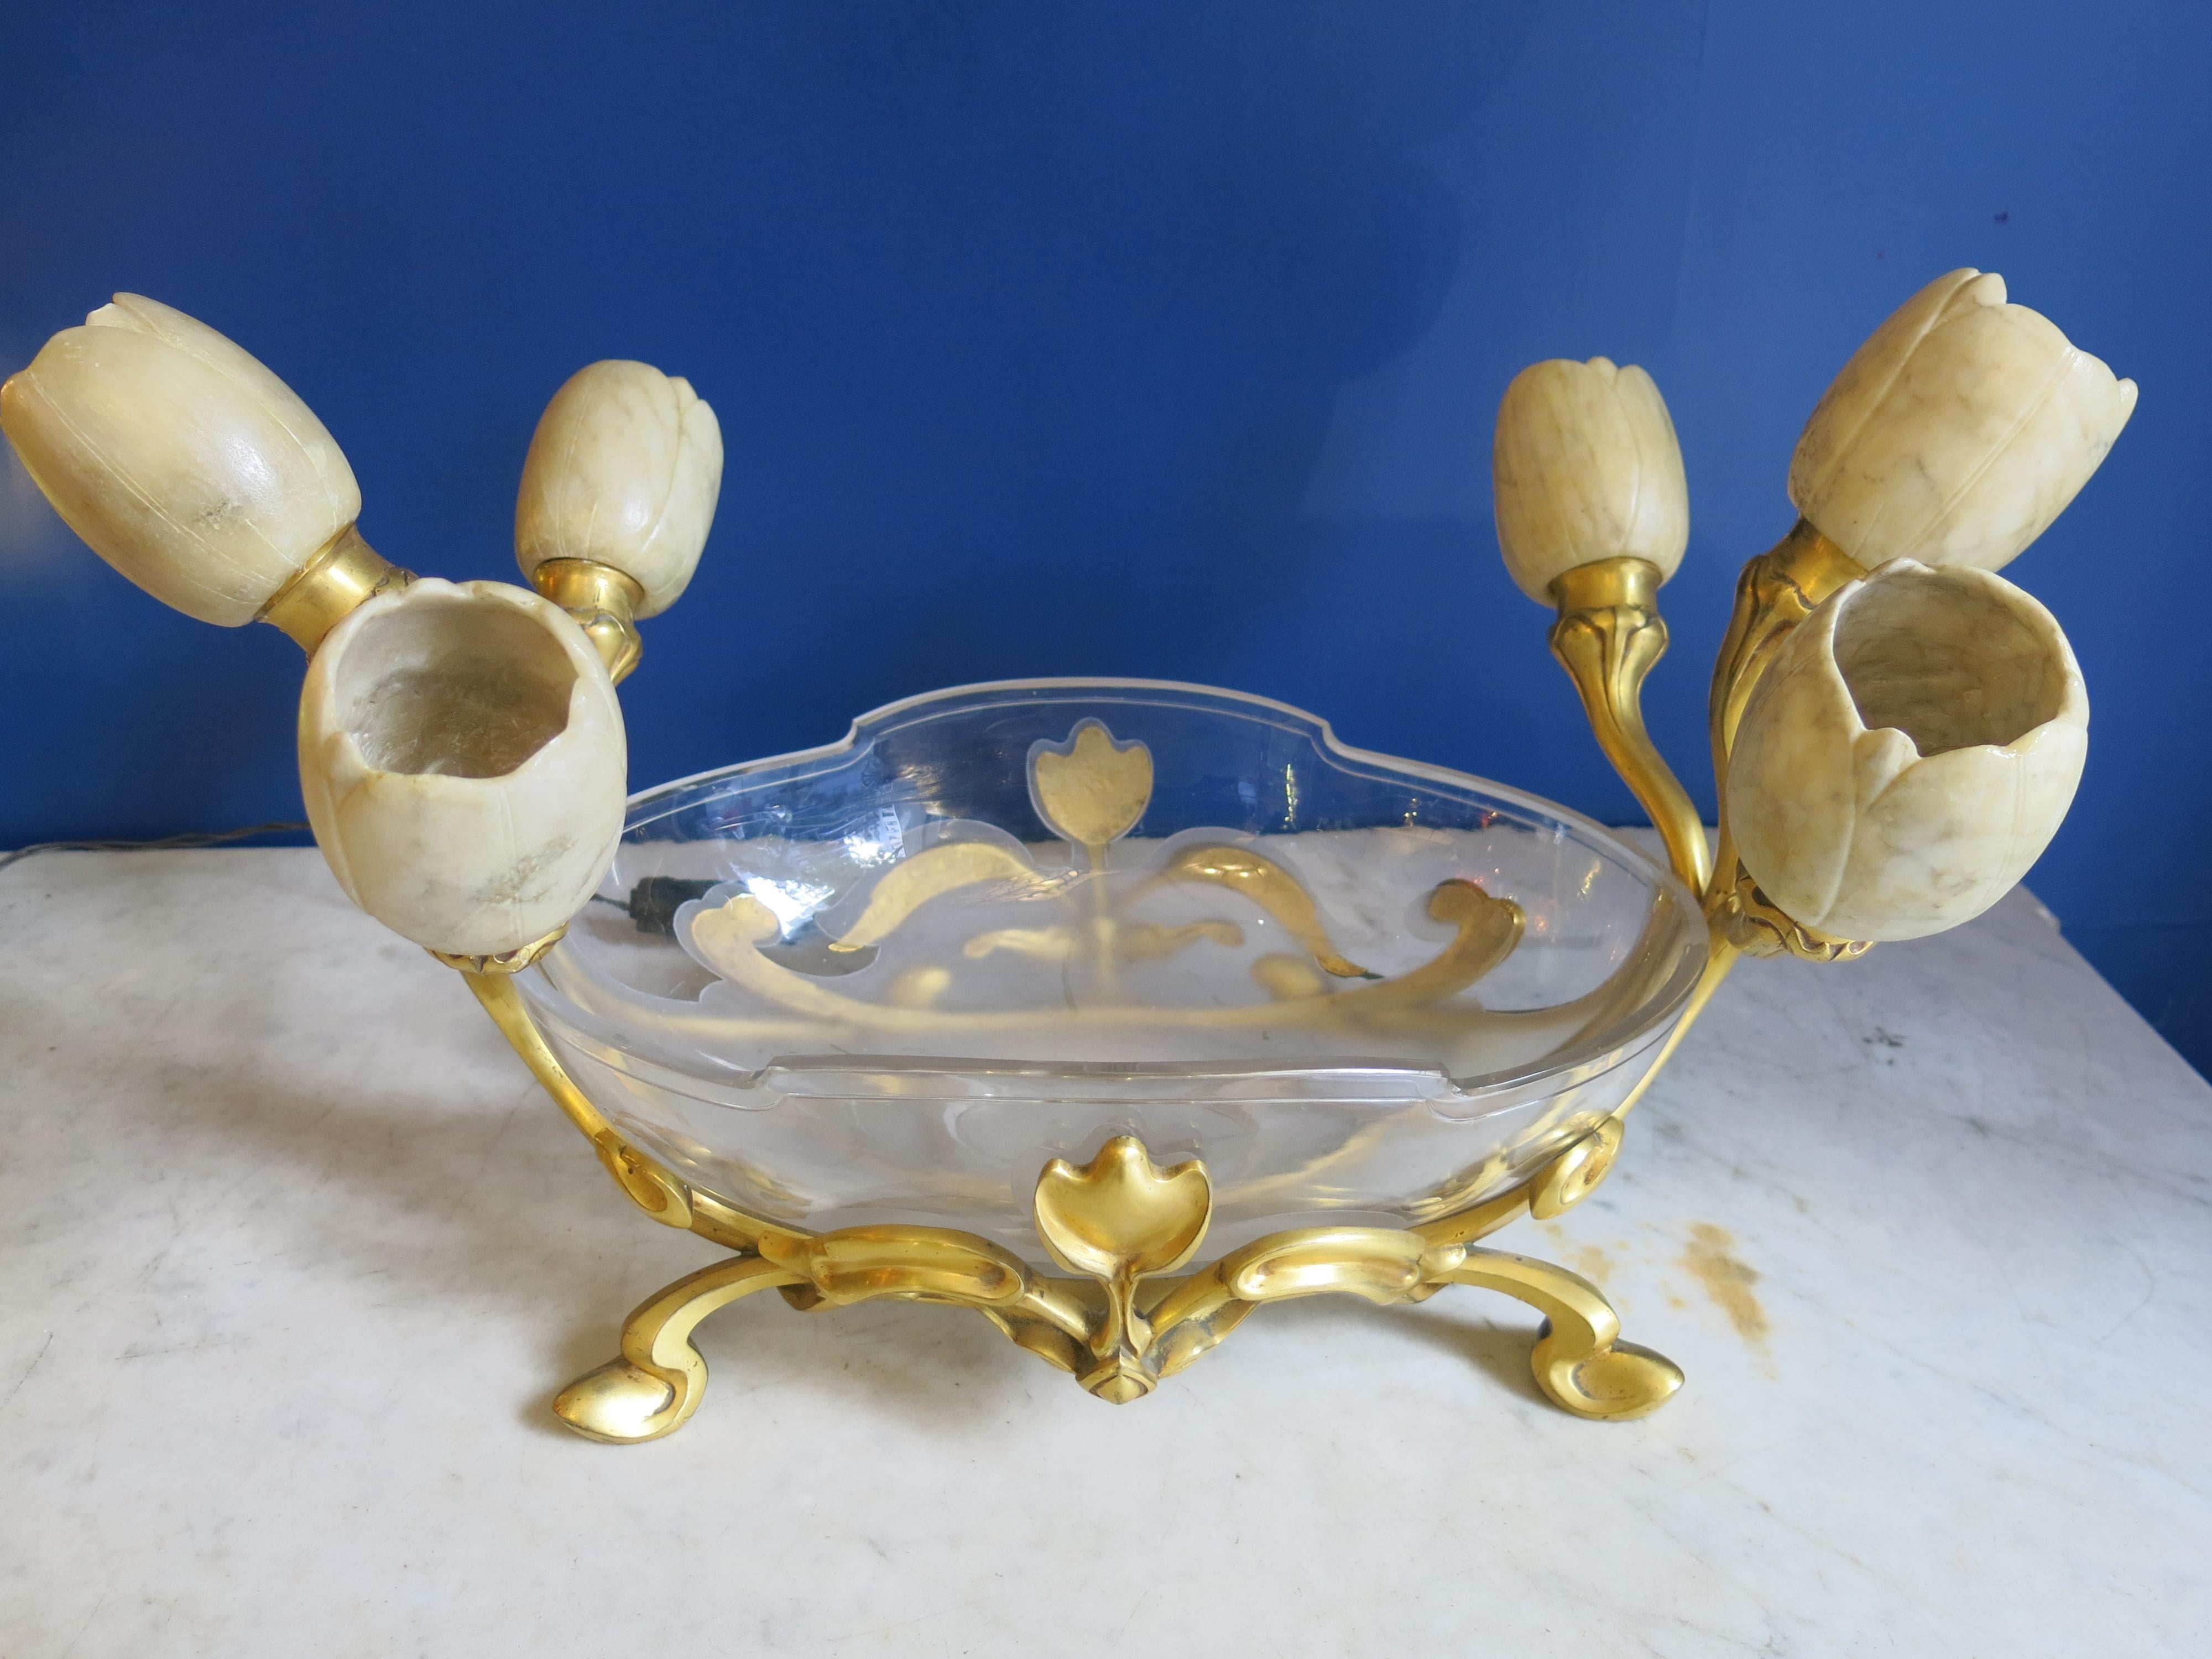 Very unique mercury gilt bronze jardiniere signed on the base Gustave Keller with Albert Cheuret alabaster tulip lamps. The acid etched glass is in excellent shape made specially for the piece to match the bronze form. Electrified in excellent